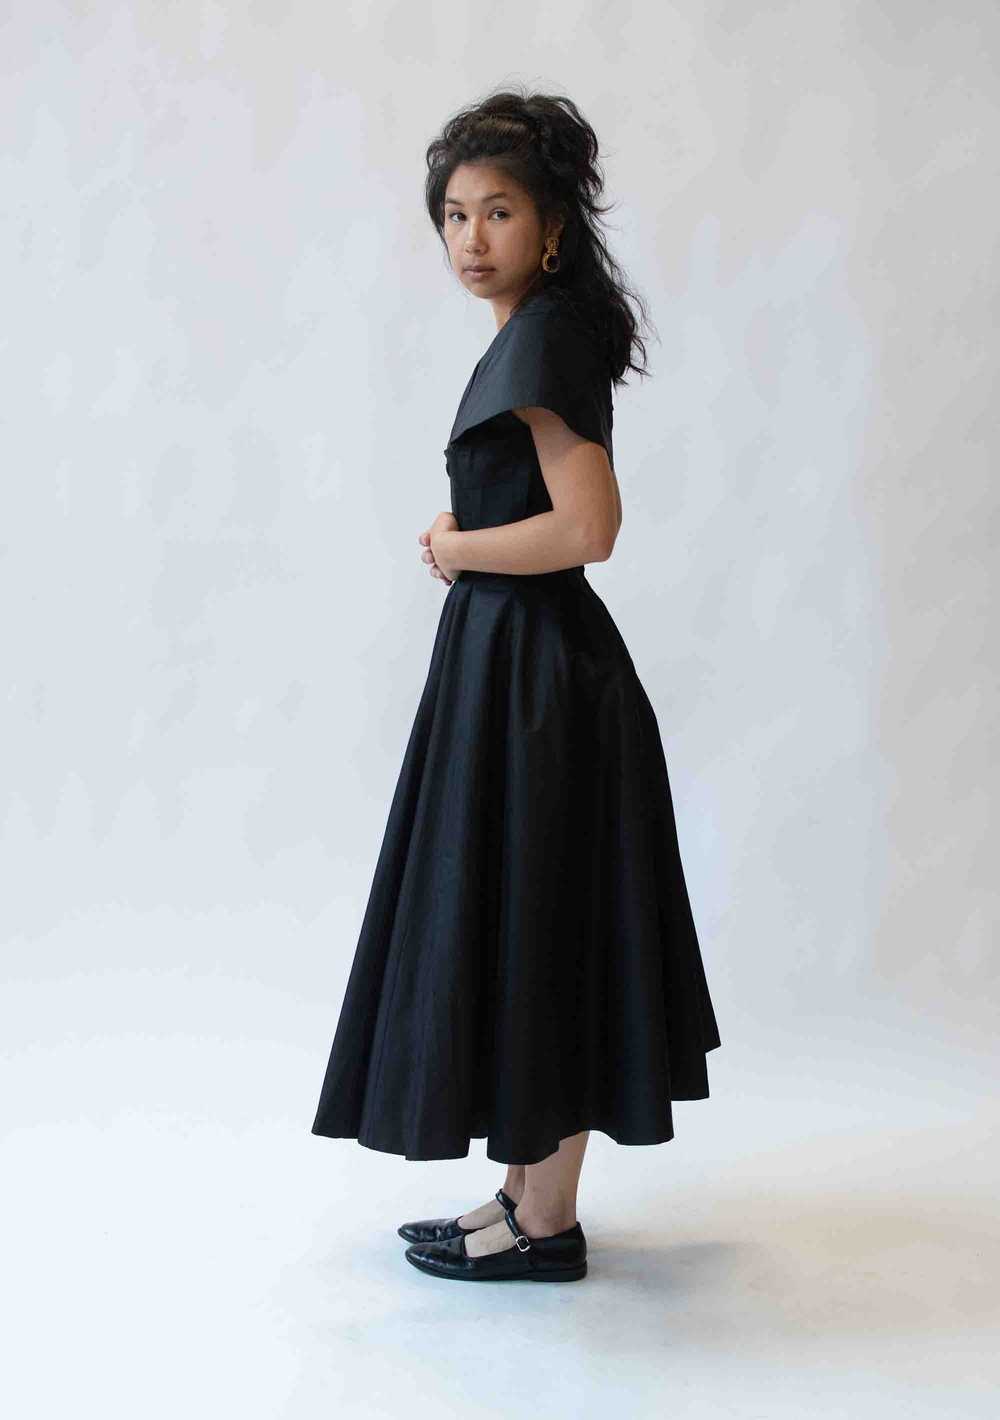 1950s New Look Dress | Suzy Perette - image 8